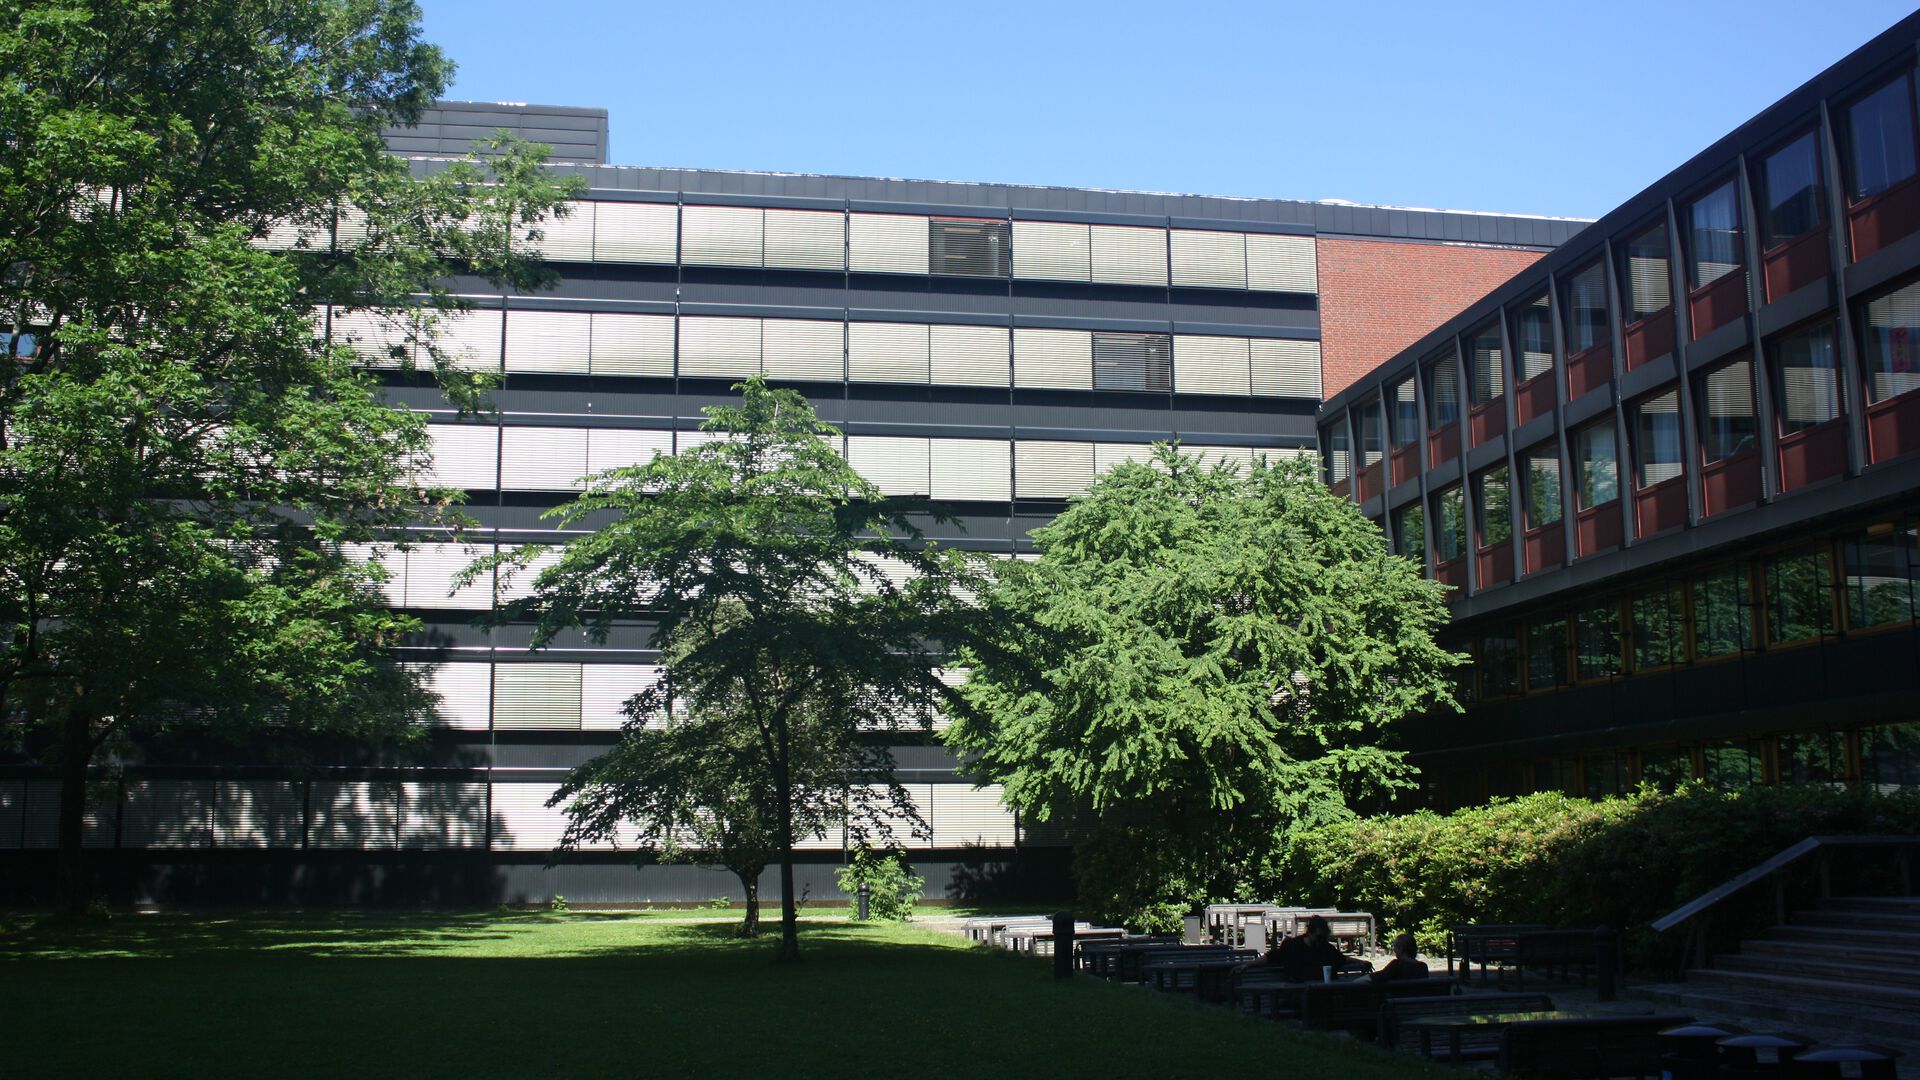 Office building in brick with six floors. Green trees and lawn in the foreground.